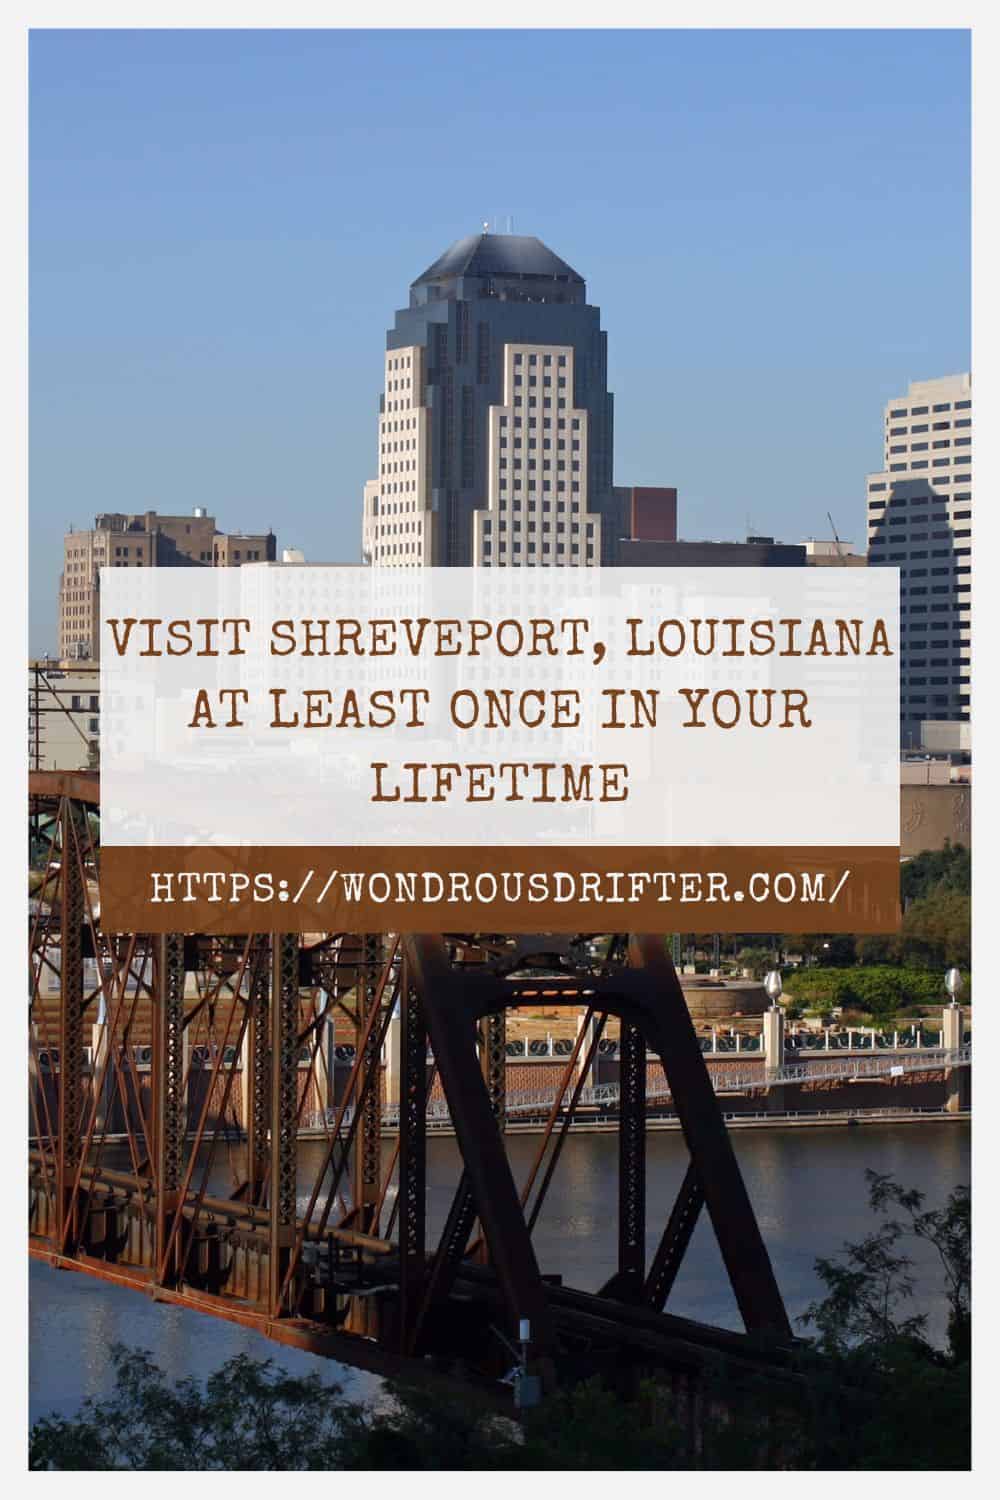 Visit Shreveport Louisiana at least once in your lifetime